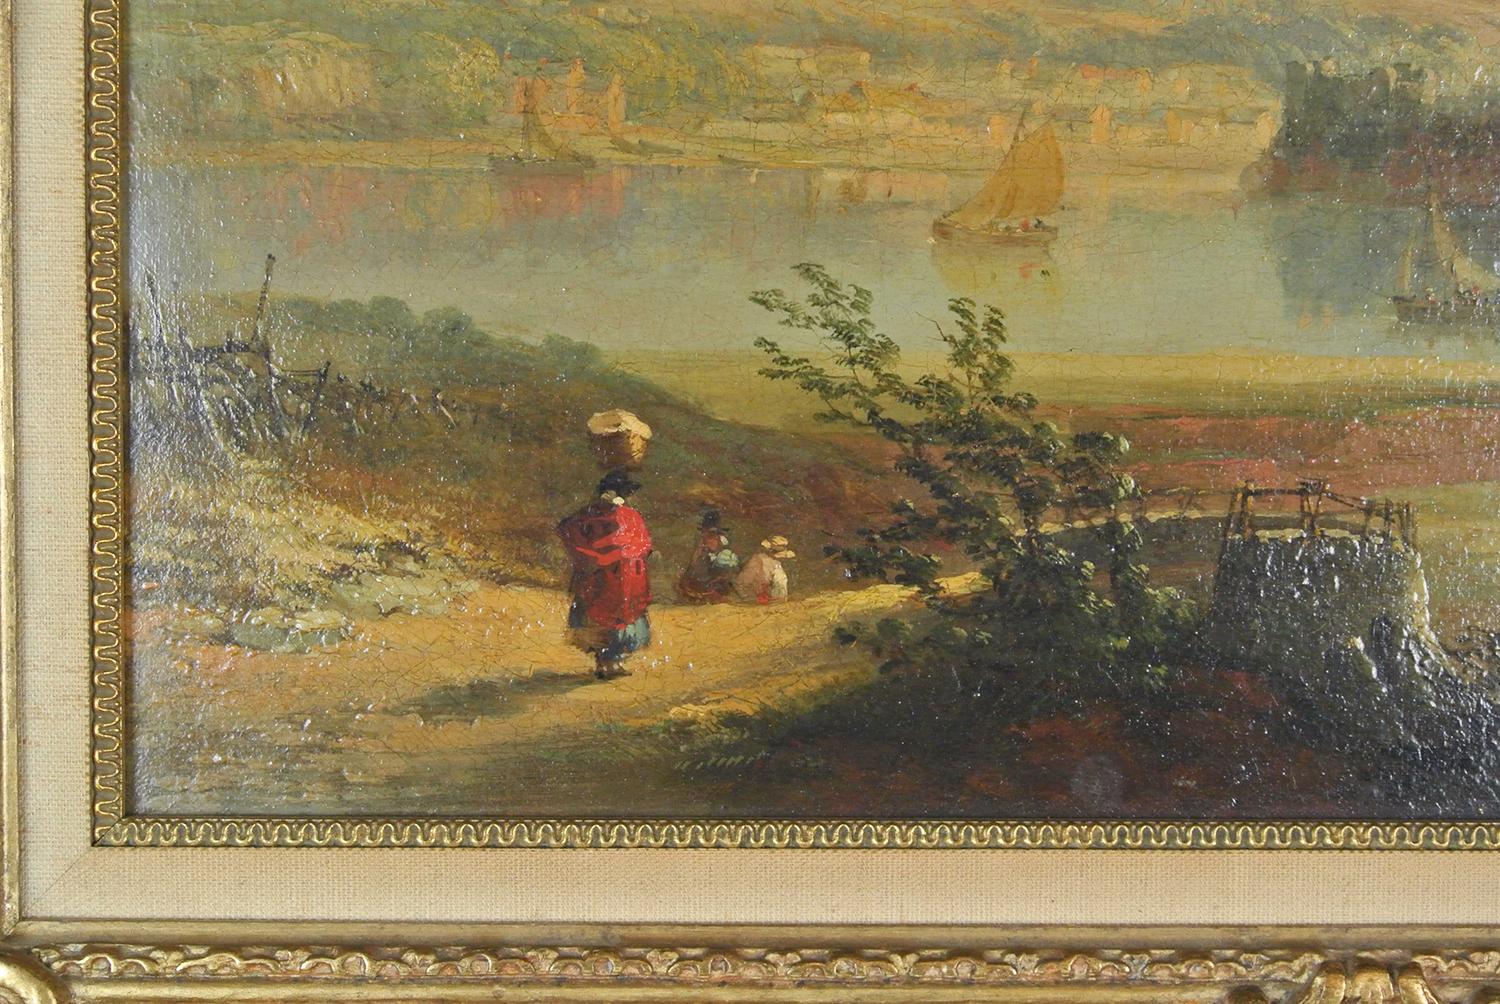 Paint Fine 19th Century English School Original Oil on Canvas by William Pitt - 1856 For Sale